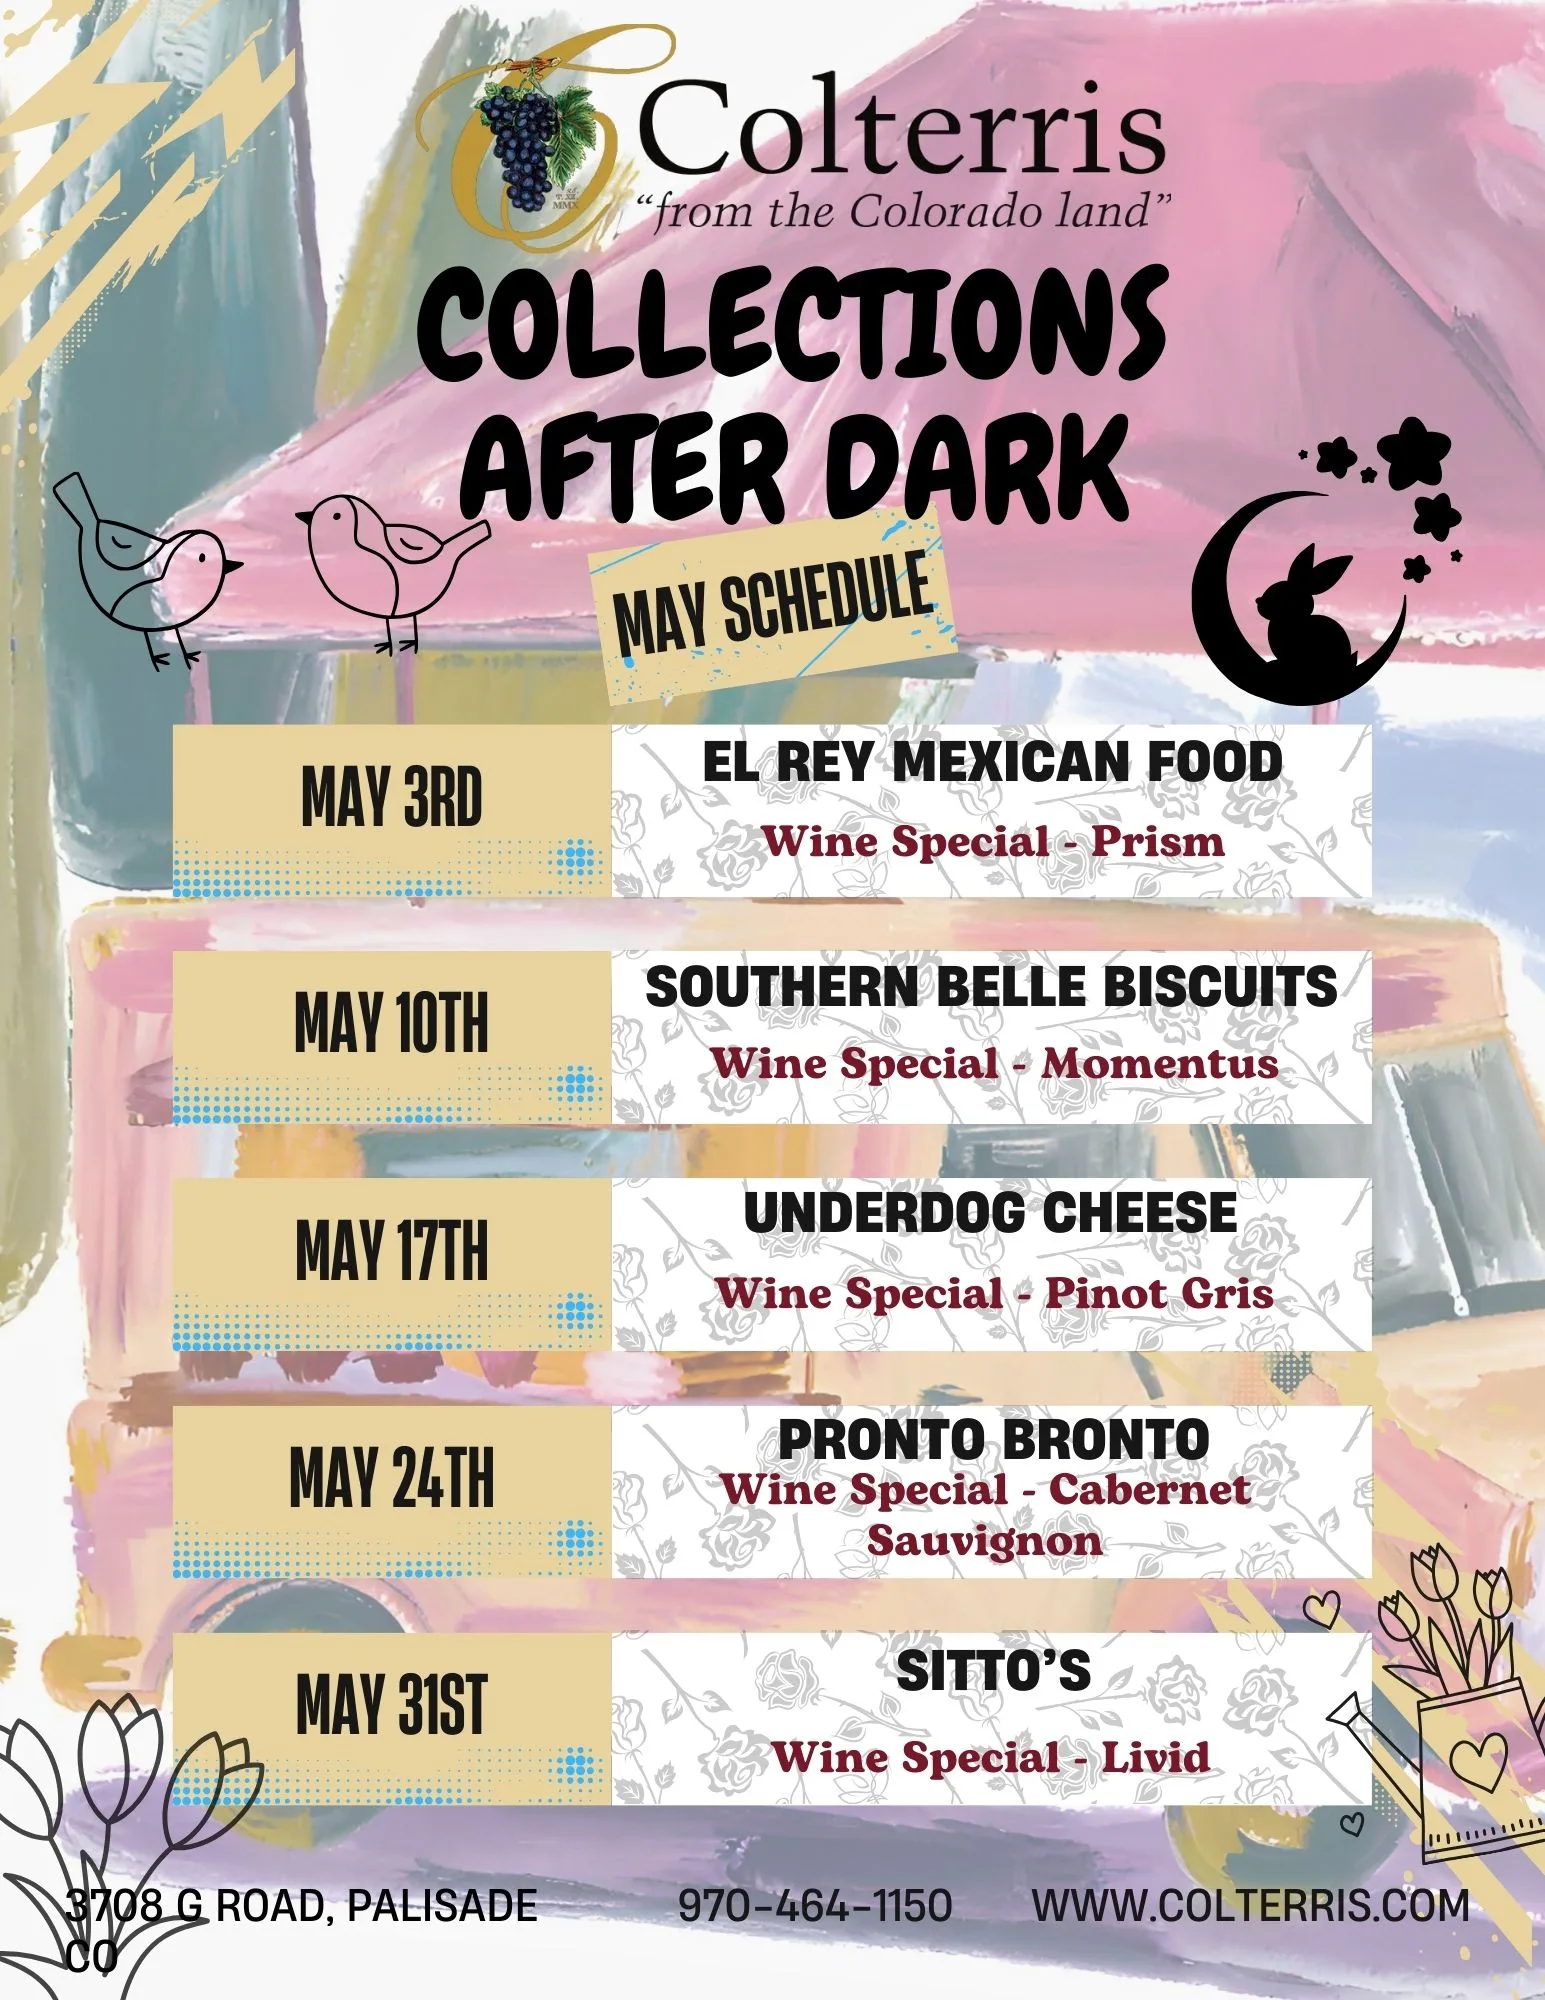 Collections After Dark May schedule of events.